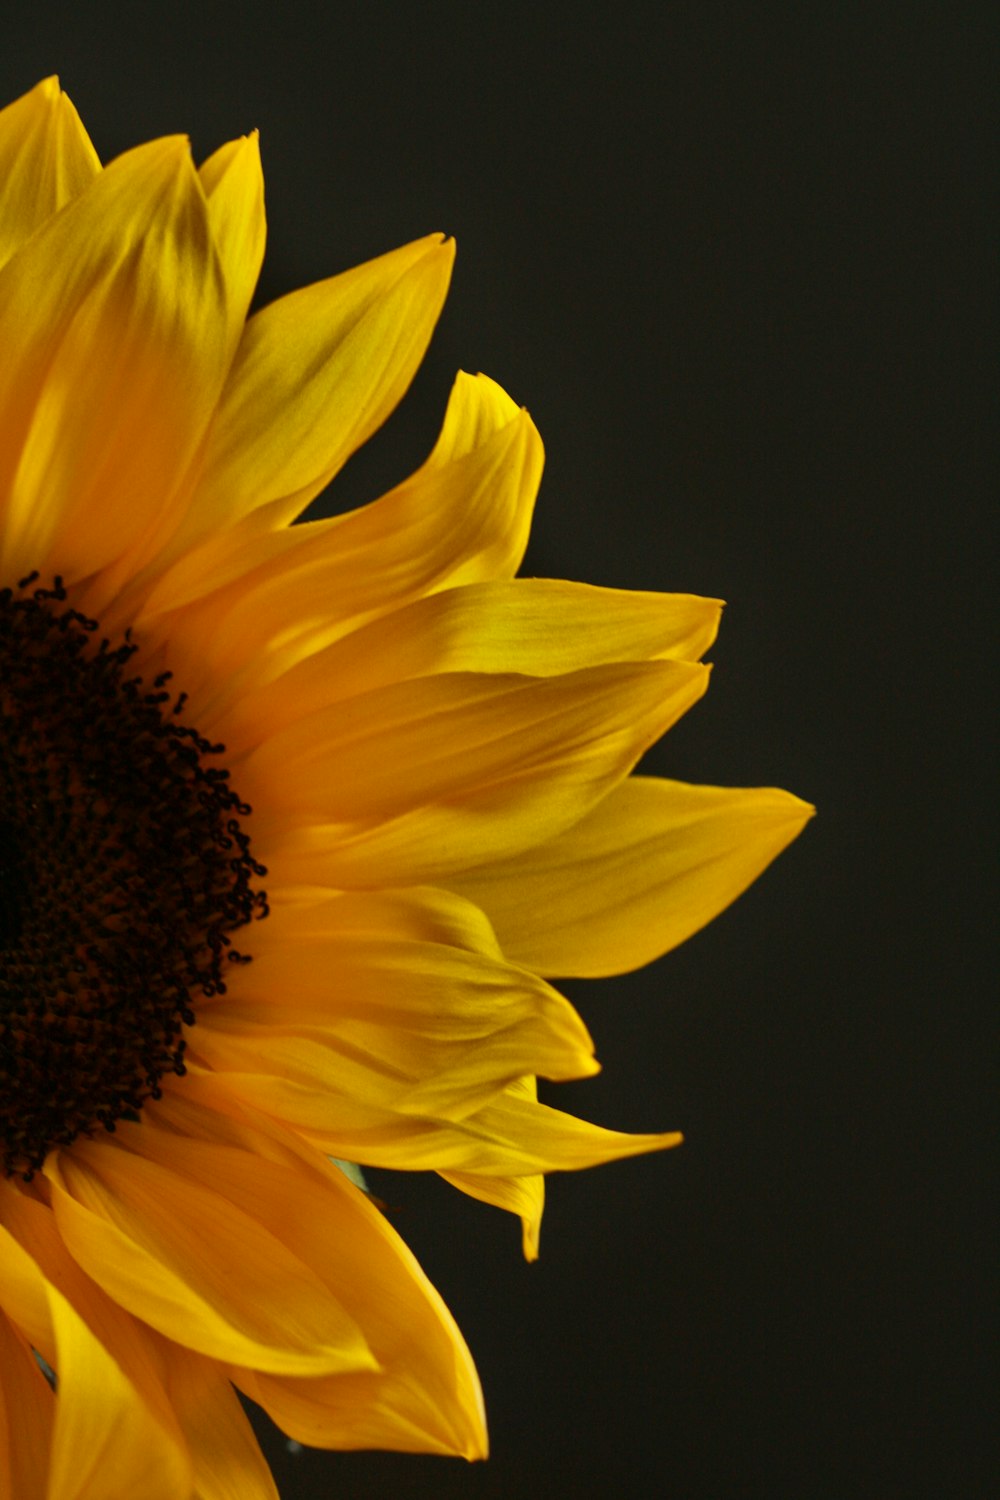 a yellow sunflower with a black background